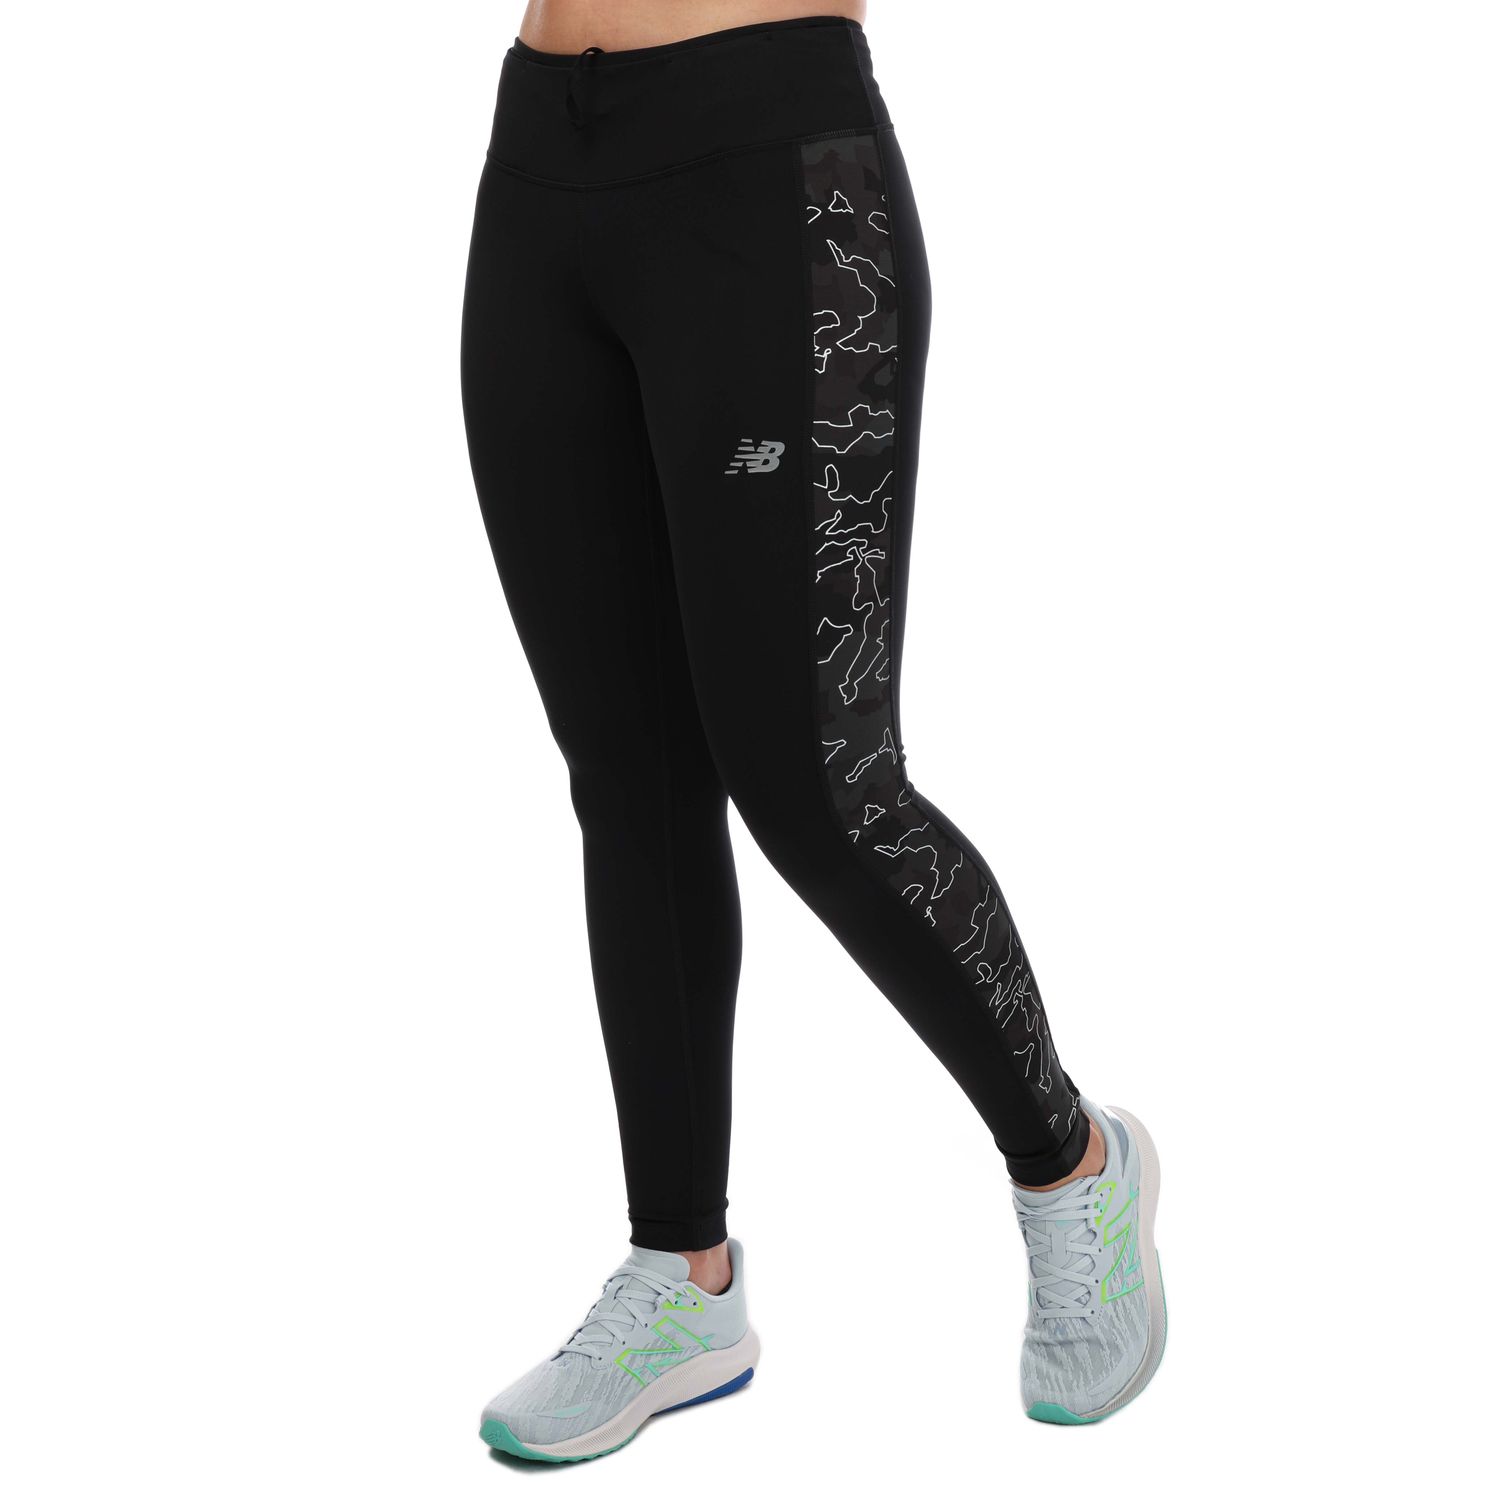 New Balance Accelerate Tights - AirRobe